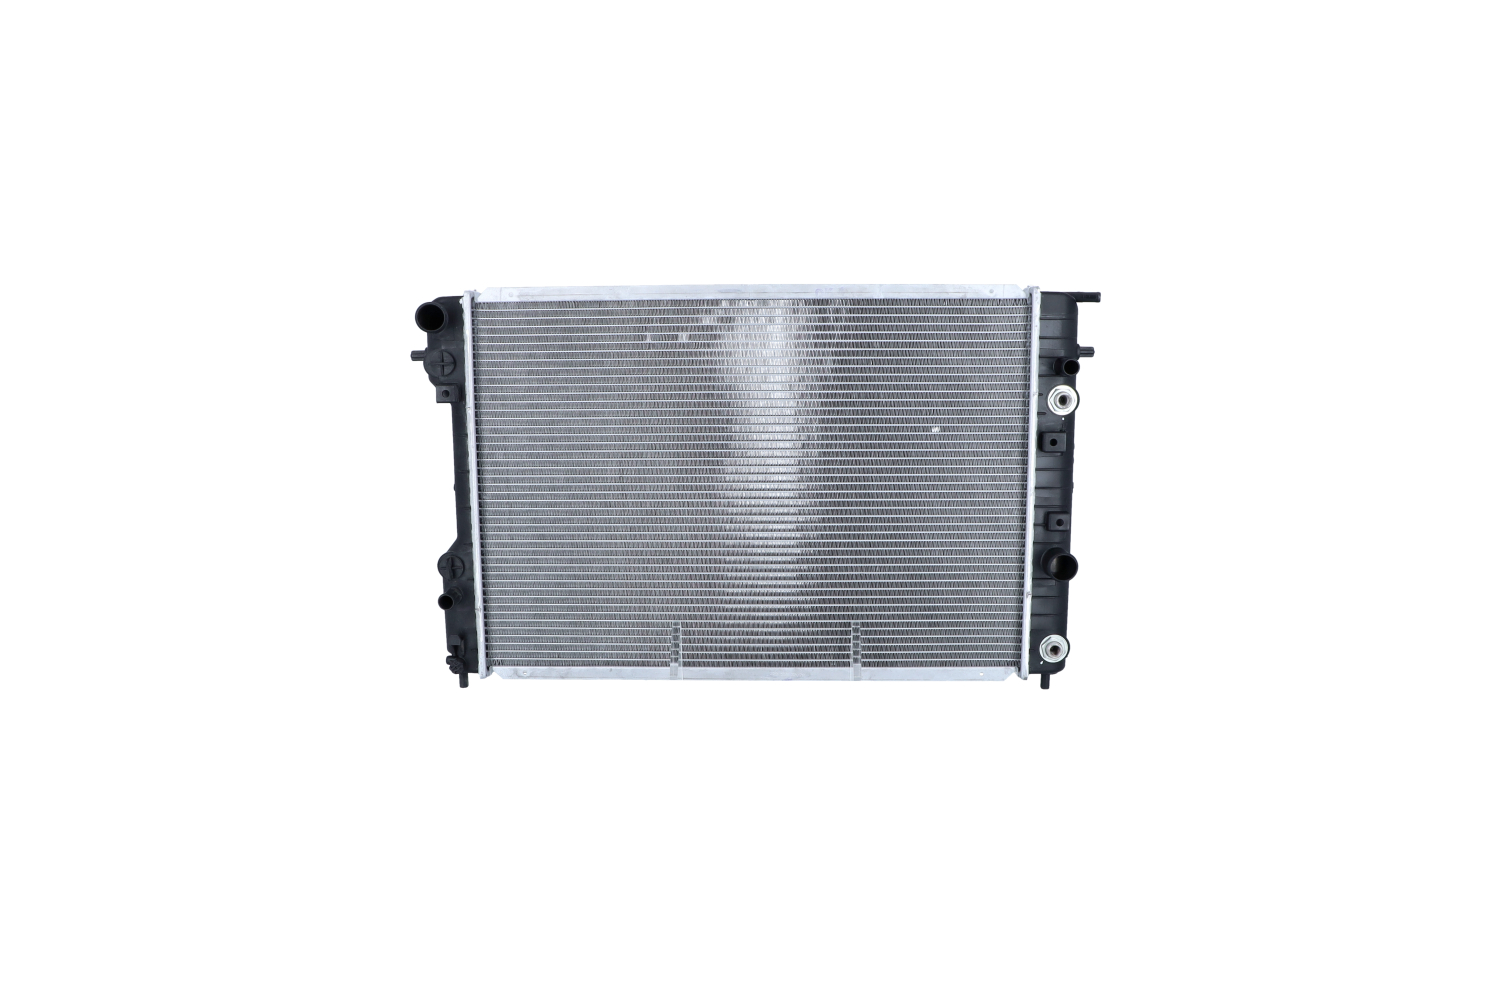 NRF 529689 Engine radiator Aluminium, 653 x 445 x 30 mm, with mounting parts, Brazed cooling fins